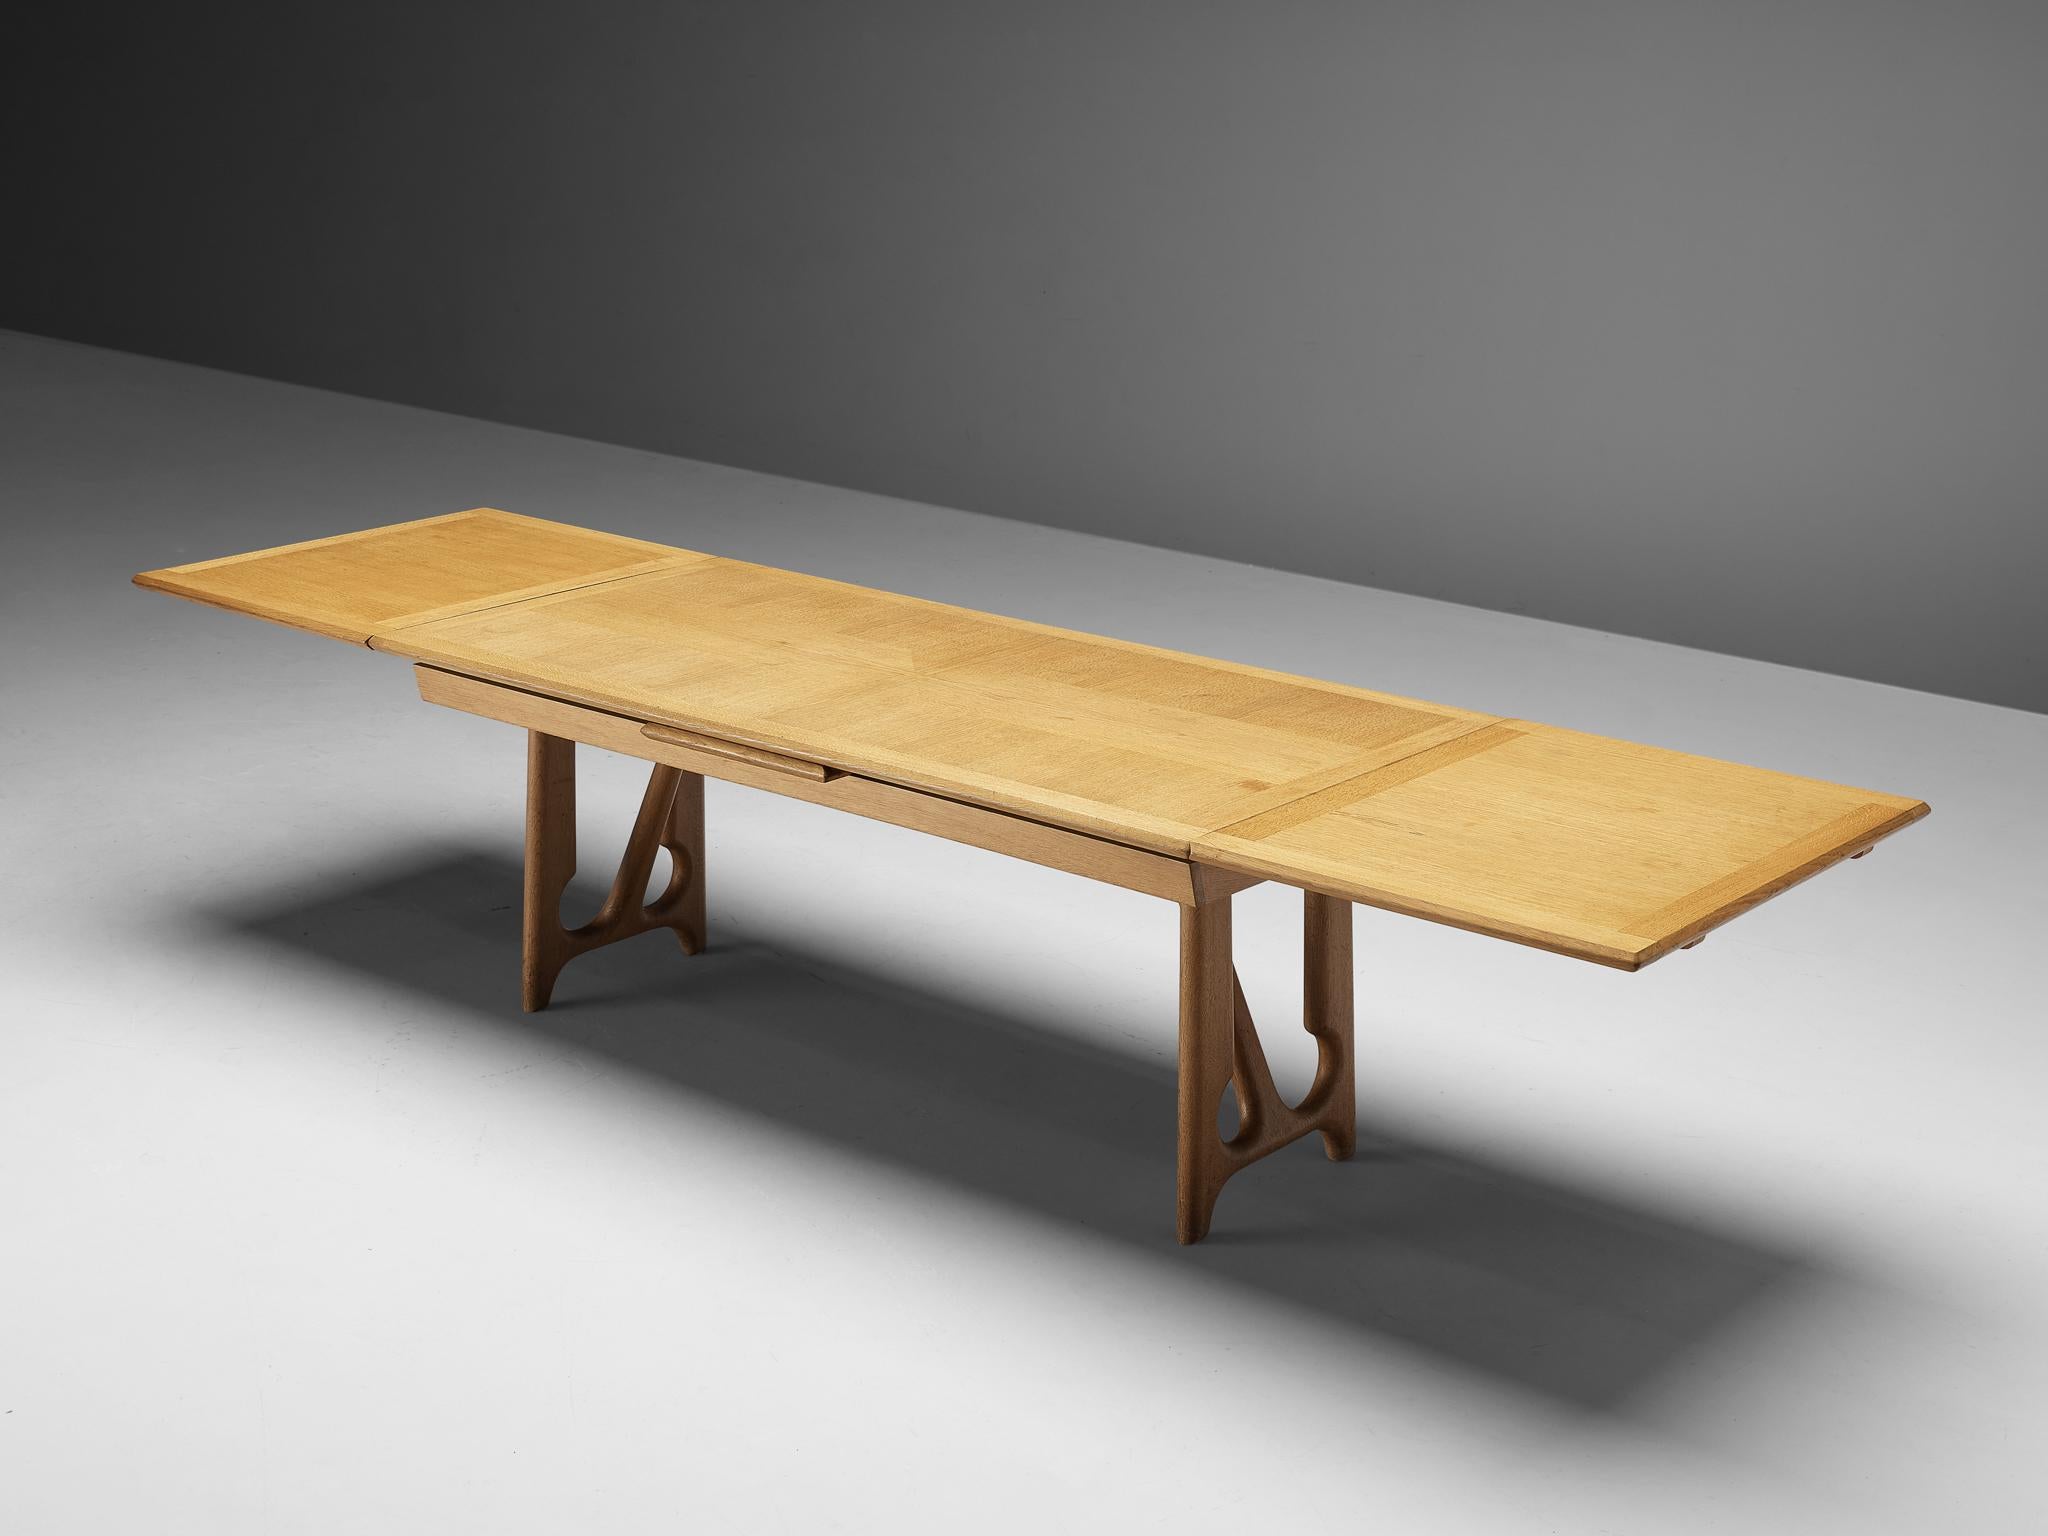 Guillerme & Chambron, dining table, oak, France, 1965.

Extendable dining table in solid oak by French designers Guillerme et Chambron. This elegant table shows interesting details. Most attractive is the inlayed top. These graphical patterns show